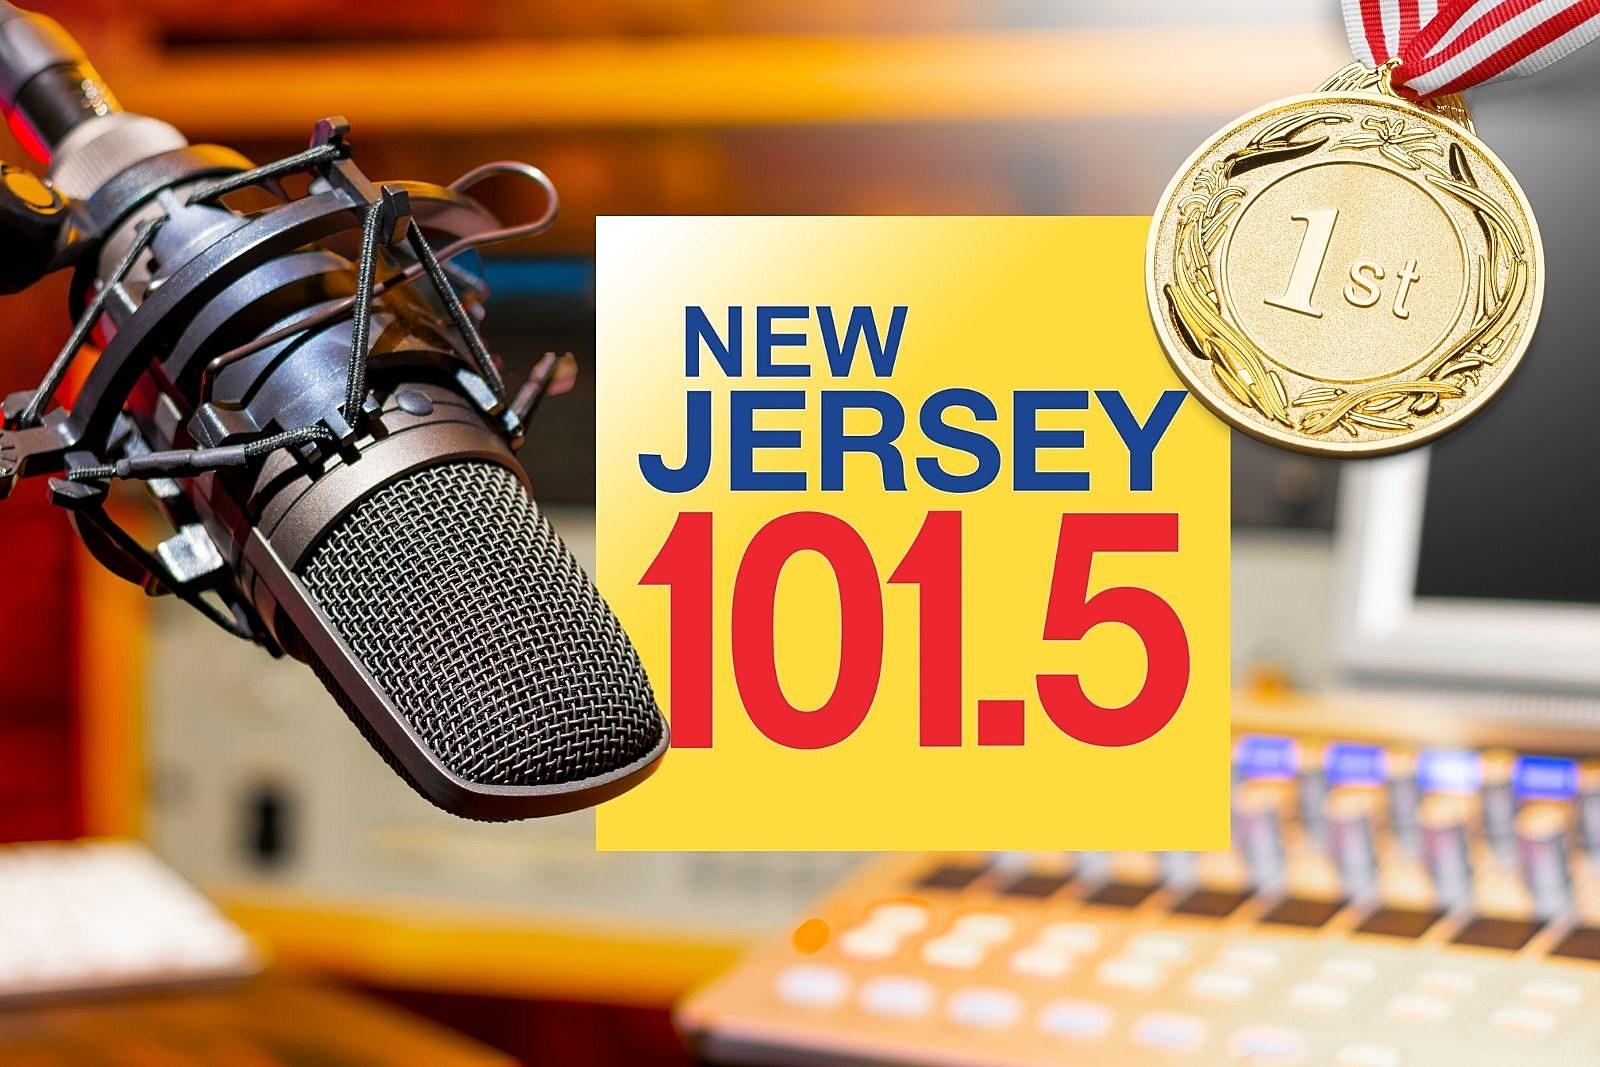 NJ 101.5 wins first-place awards in breaking news, public service